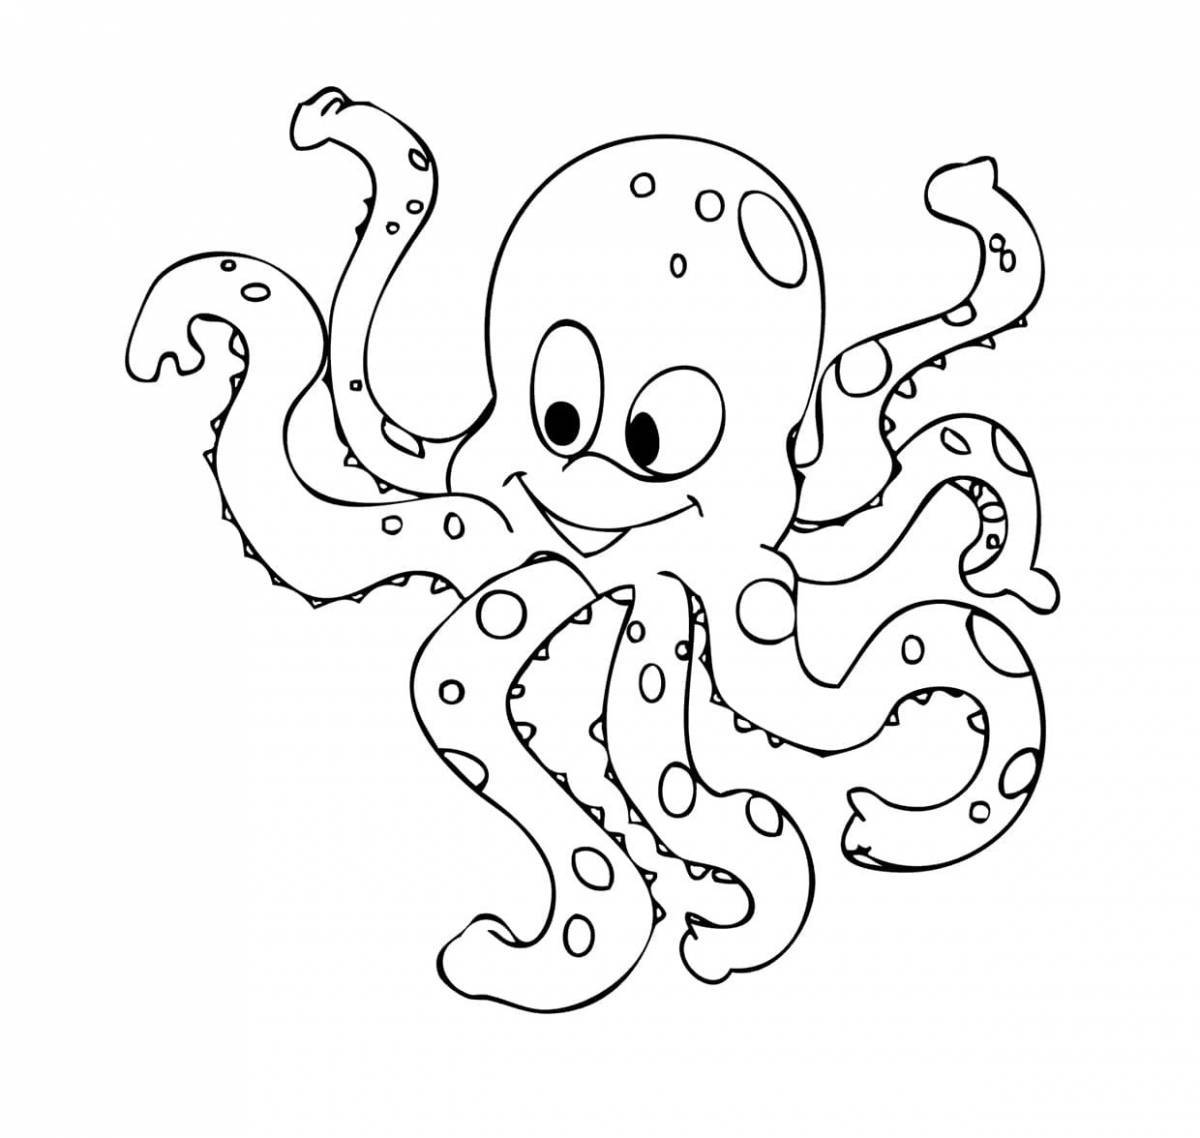 Fabulous octopus coloring book for kids